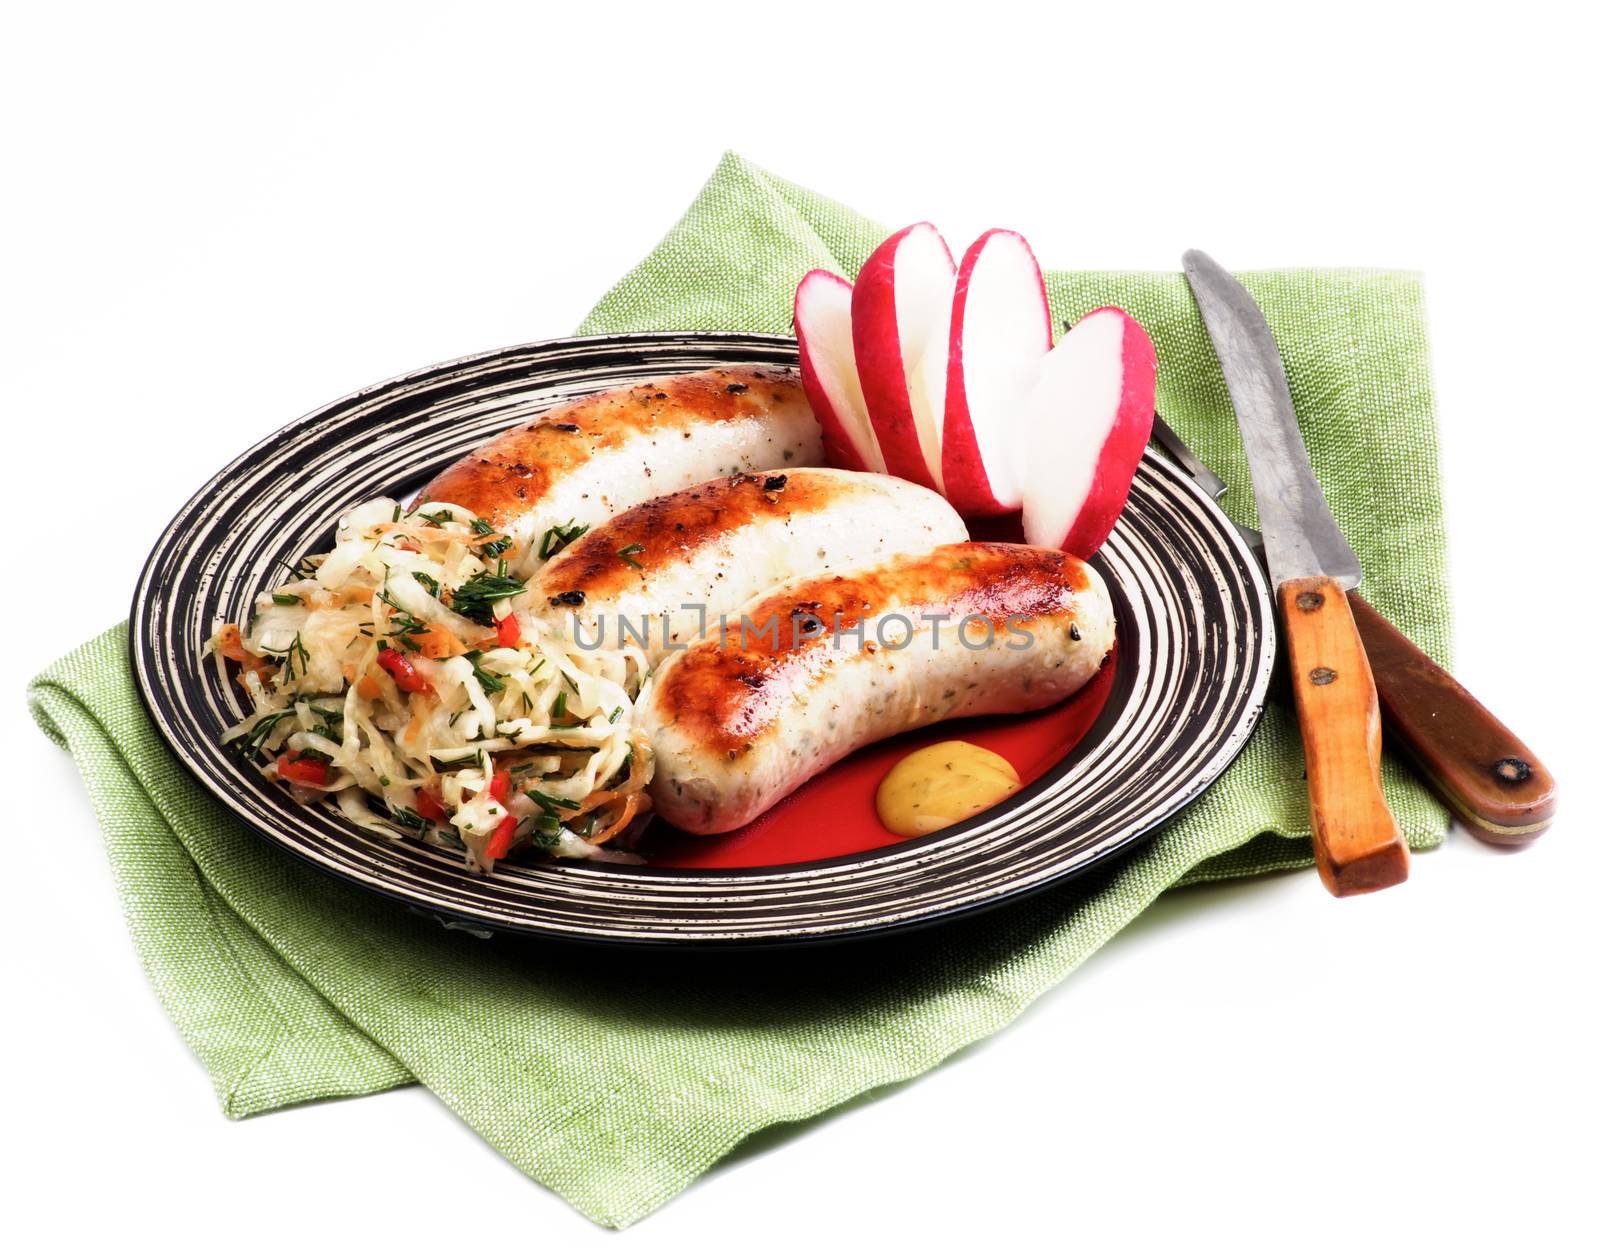 Delicious Grilled White Munich Sausages with Pickled Cabbage, Chopped Radish and Mustard Sauce on Red Striped Plate isolated on White background